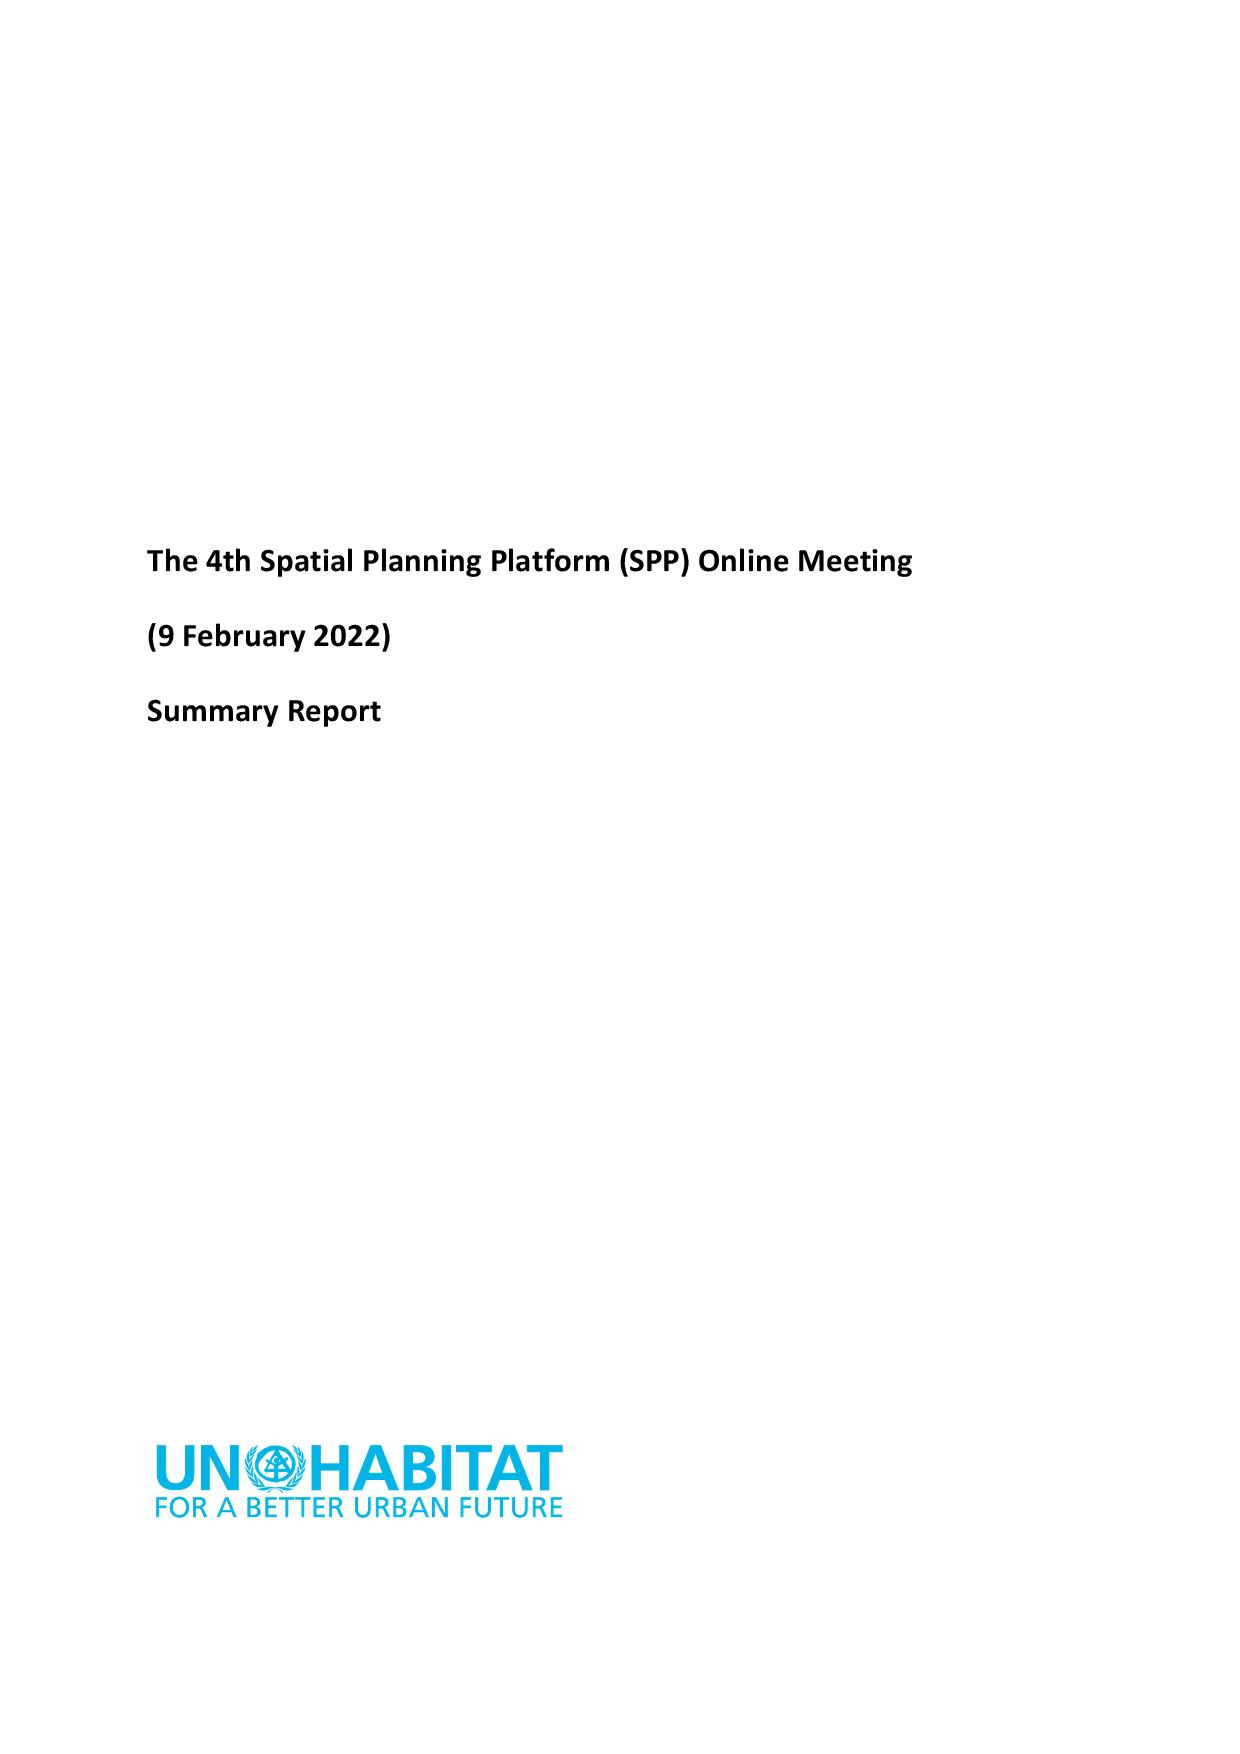 The 4th Spatial Planning Platform (SPP) Online Meeting (9 February 2022) Summary Report